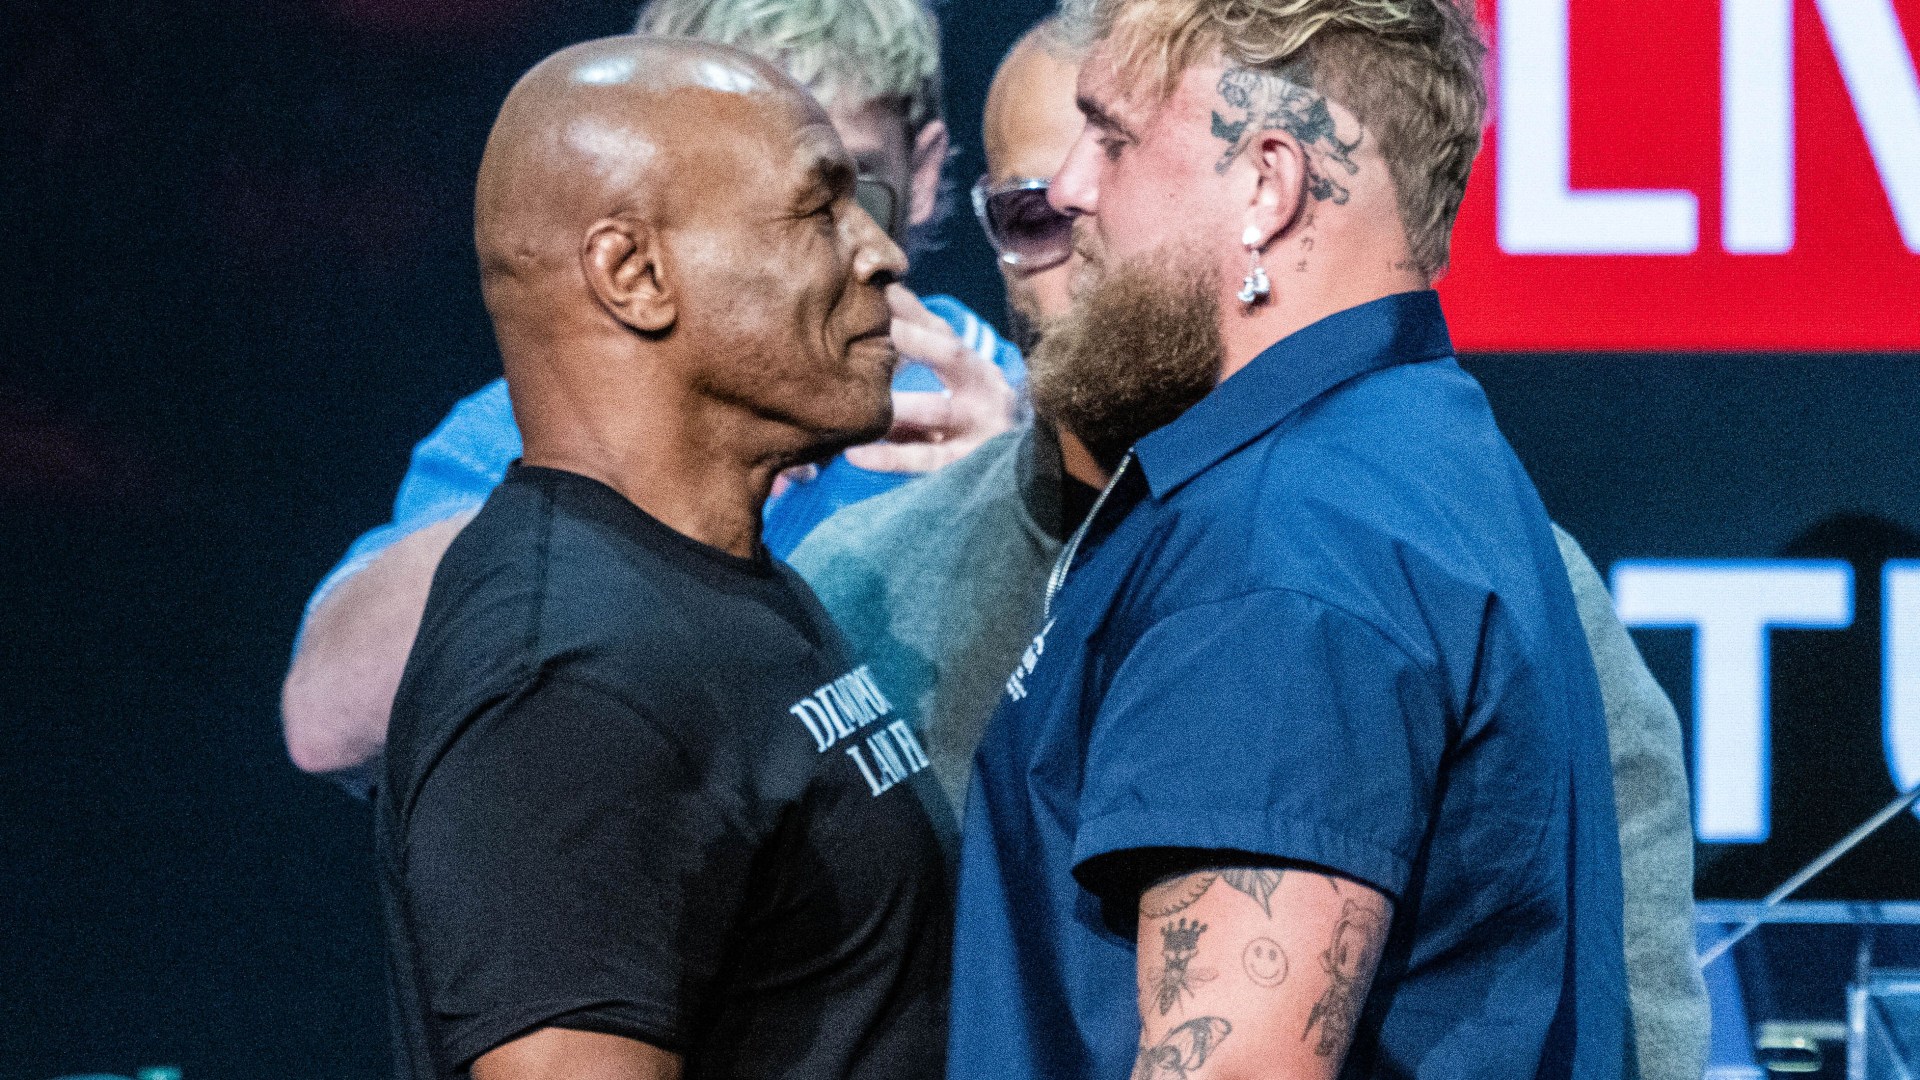 Fears Mike Tyson vs Jake Paul is ‘rigged’ as Saudi boxing chief tweets about fight ‘script’ [Video]